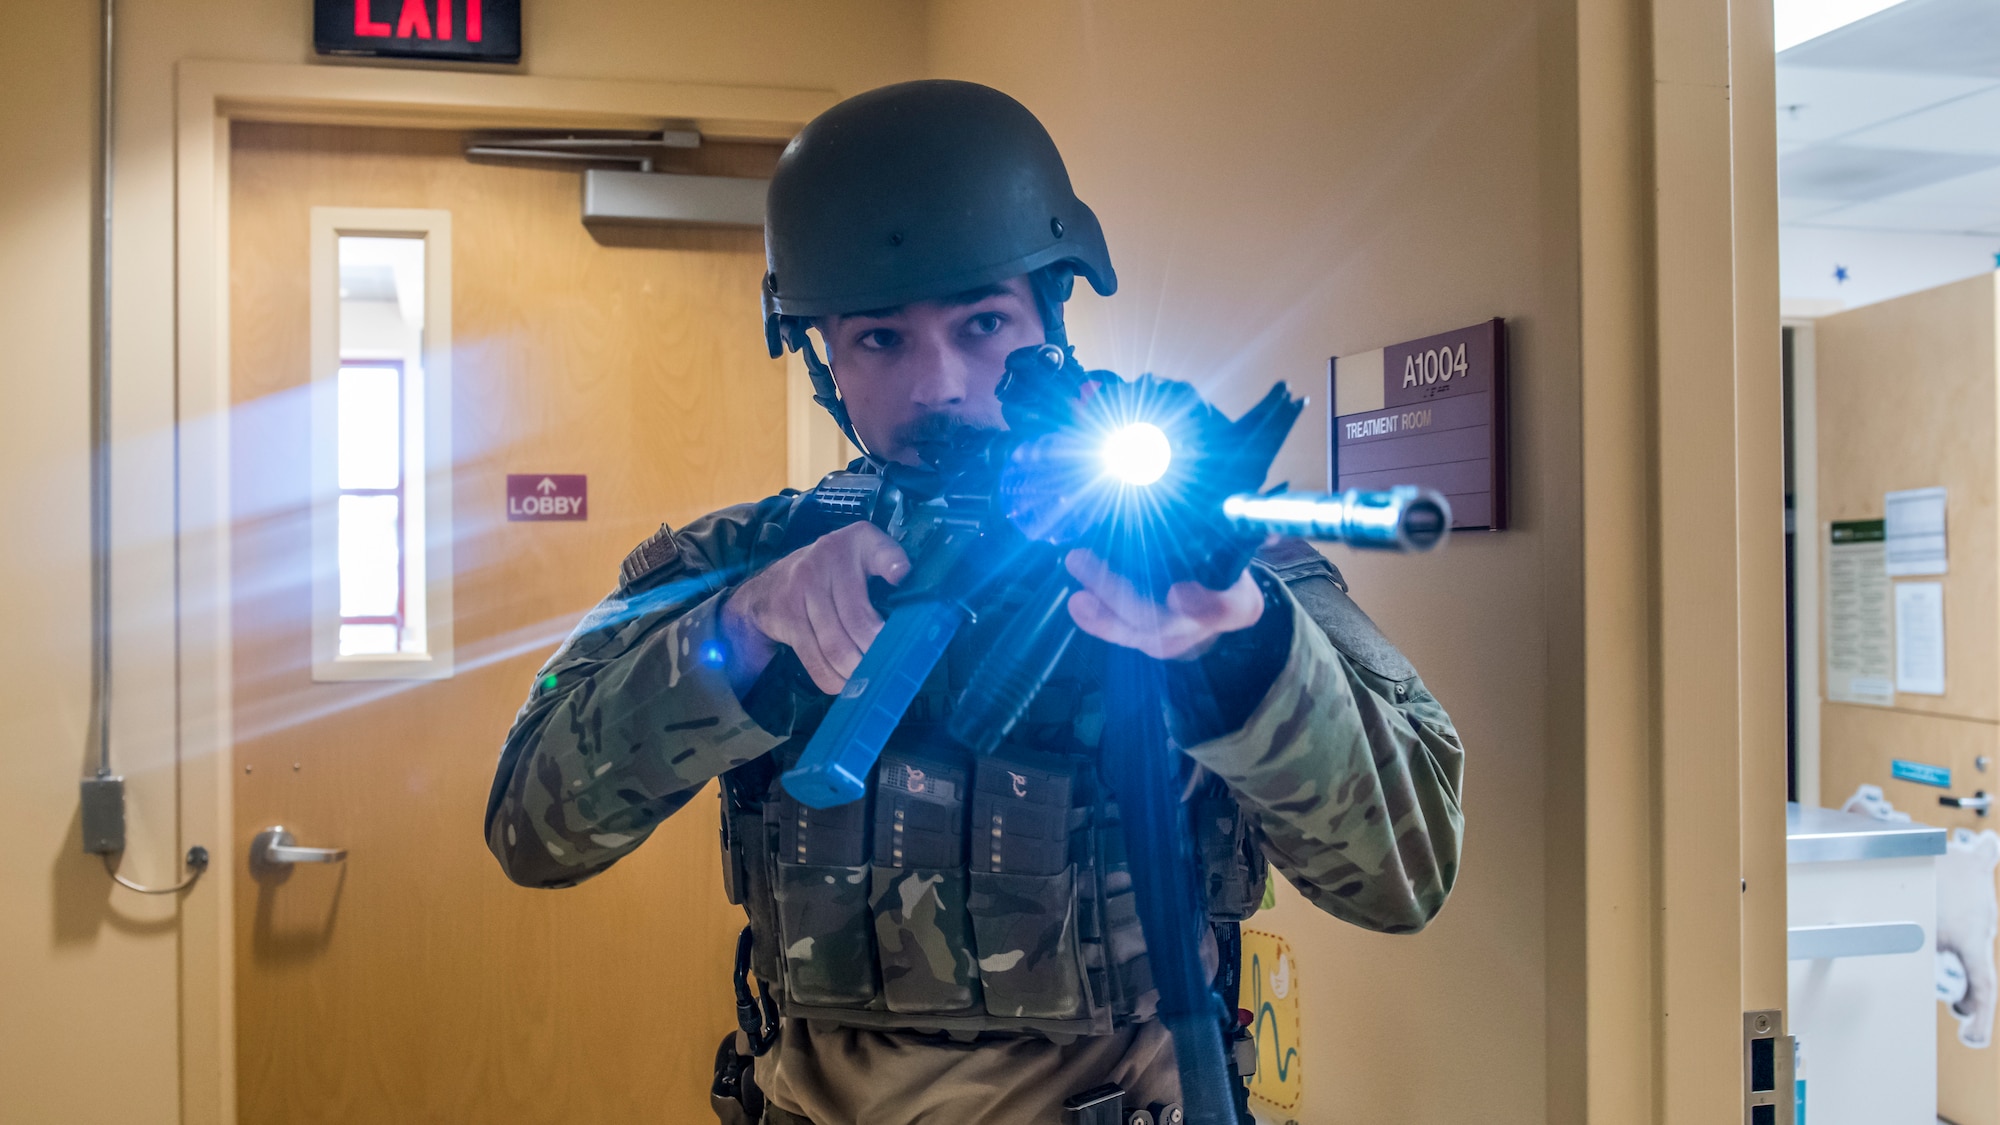 Senior Airman Richard Nicholas, 412th Security Forces Squadron, moves down a hallway to secure it during an active shooter exercise at Edwards Air Force Base, California, Feb. 11. (Air Force photo by Richard Gonzales)